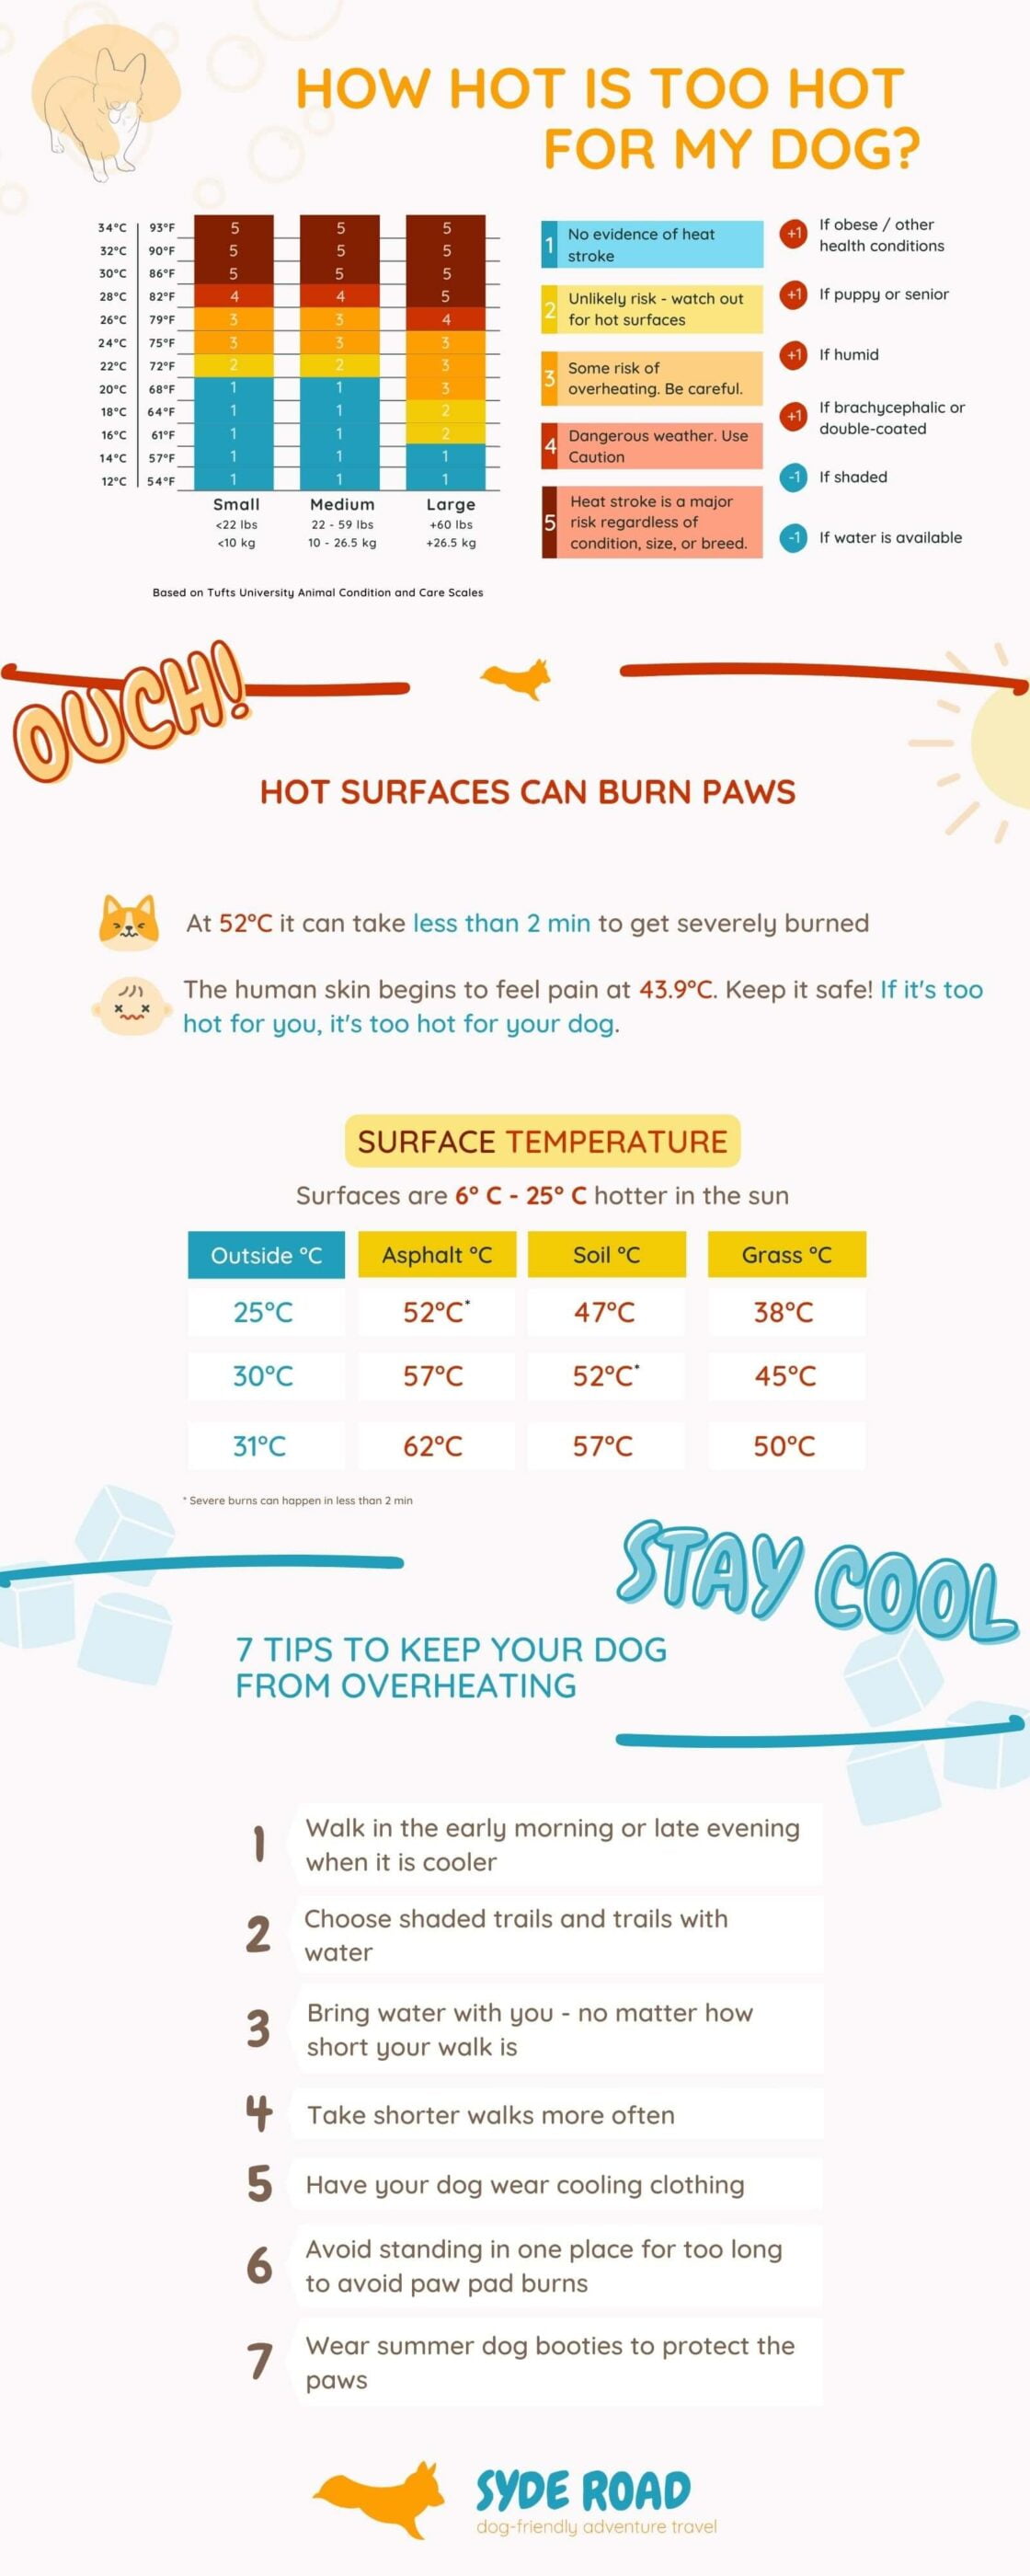 How hot is too hot for a dog infographic. Includes a table of air temperatures in degrees Celsius and Fahrenheit for small, medium, and large dogs. Chart includes additional factors like obesity, short-nosed, or double-coated that affects whether it is too hot for the dog to go outside. Below this chart is a table of surface temperatures for various surfaces to raise awareness of paw pad burns. Finally at the end of the infographic is a list of 7 tips to keep your dog from overheating.